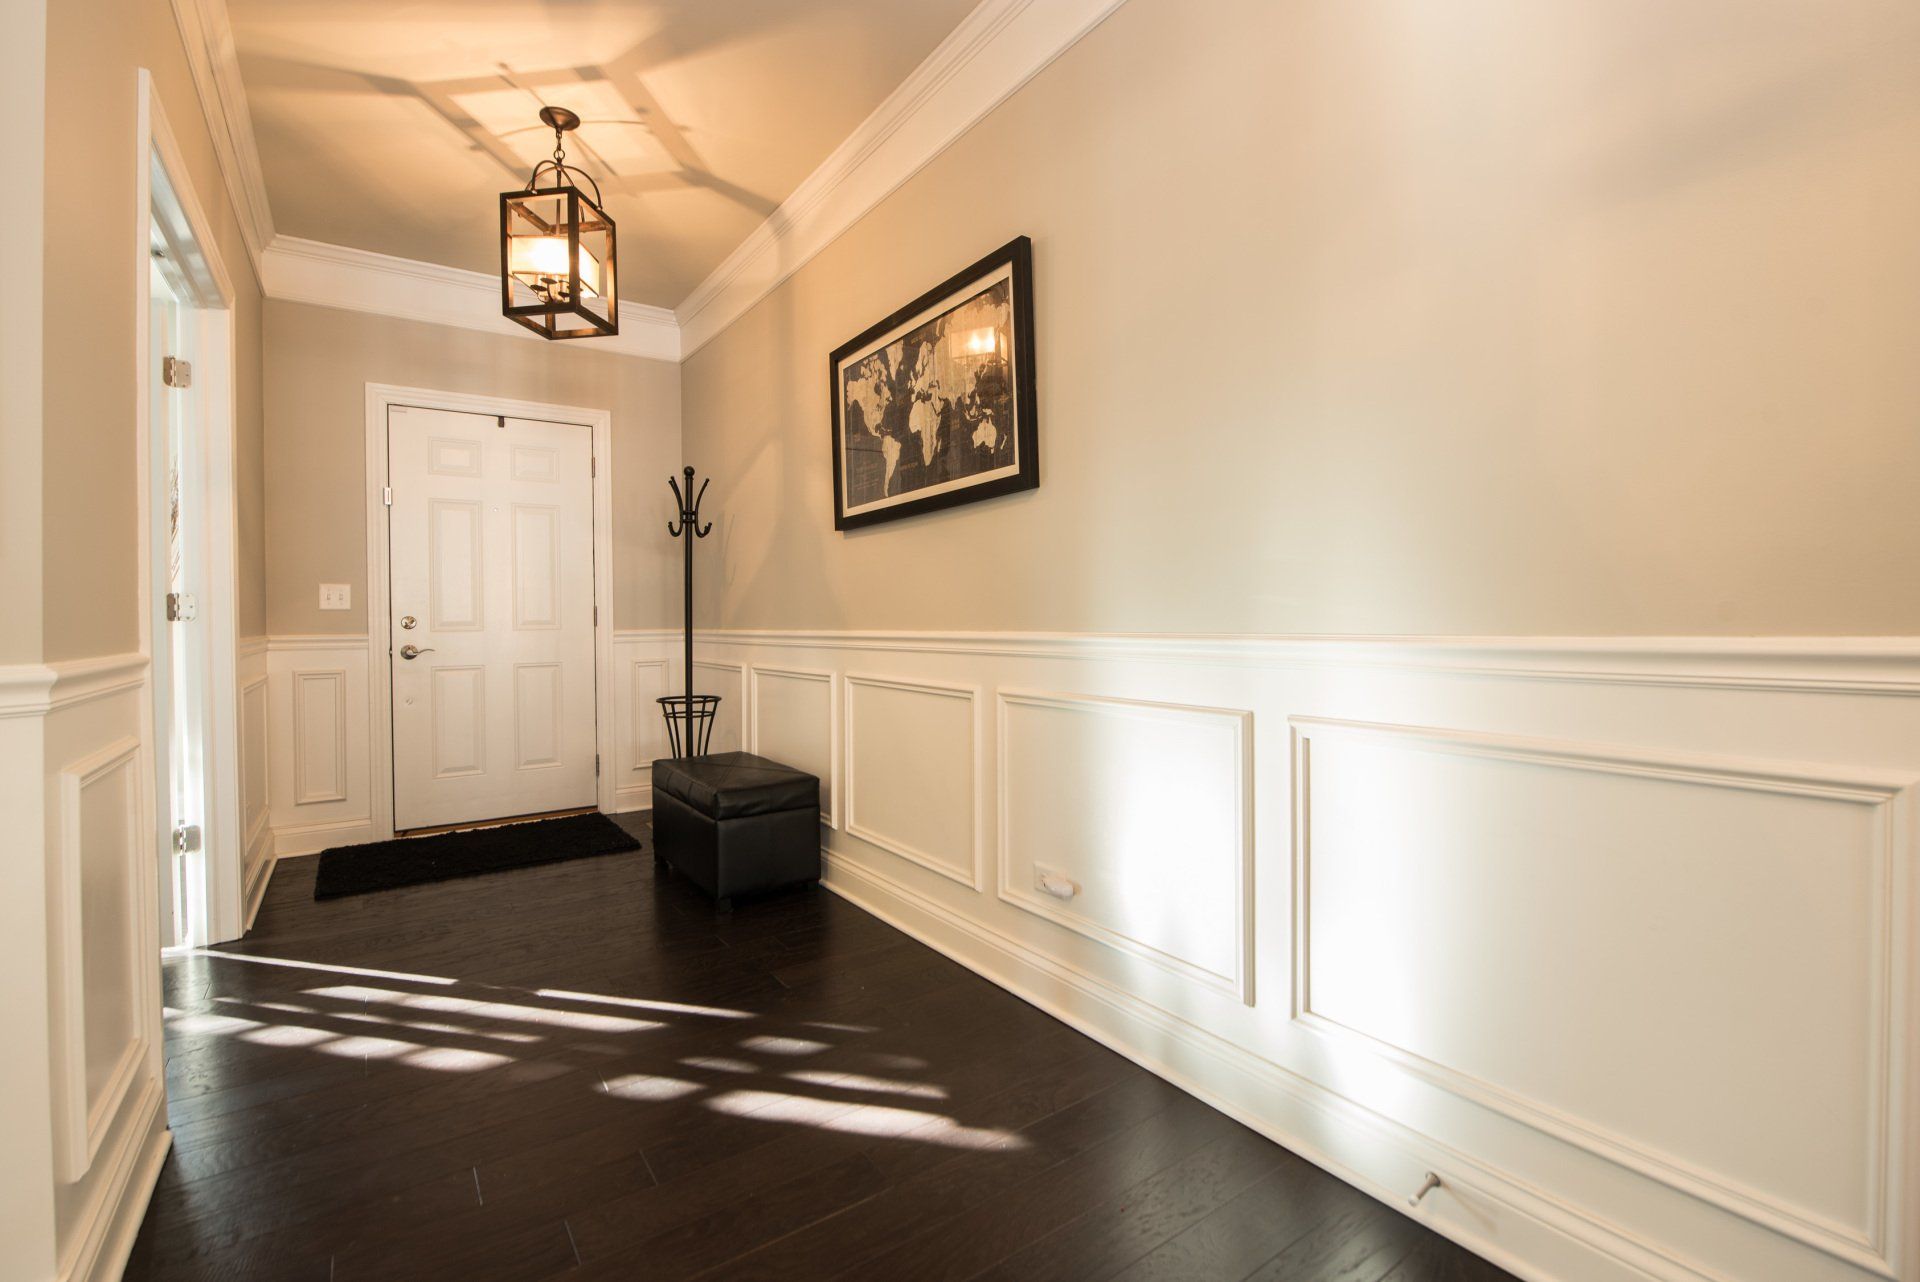 a hallway with a picture on the wall and a lantern hanging from the ceiling .